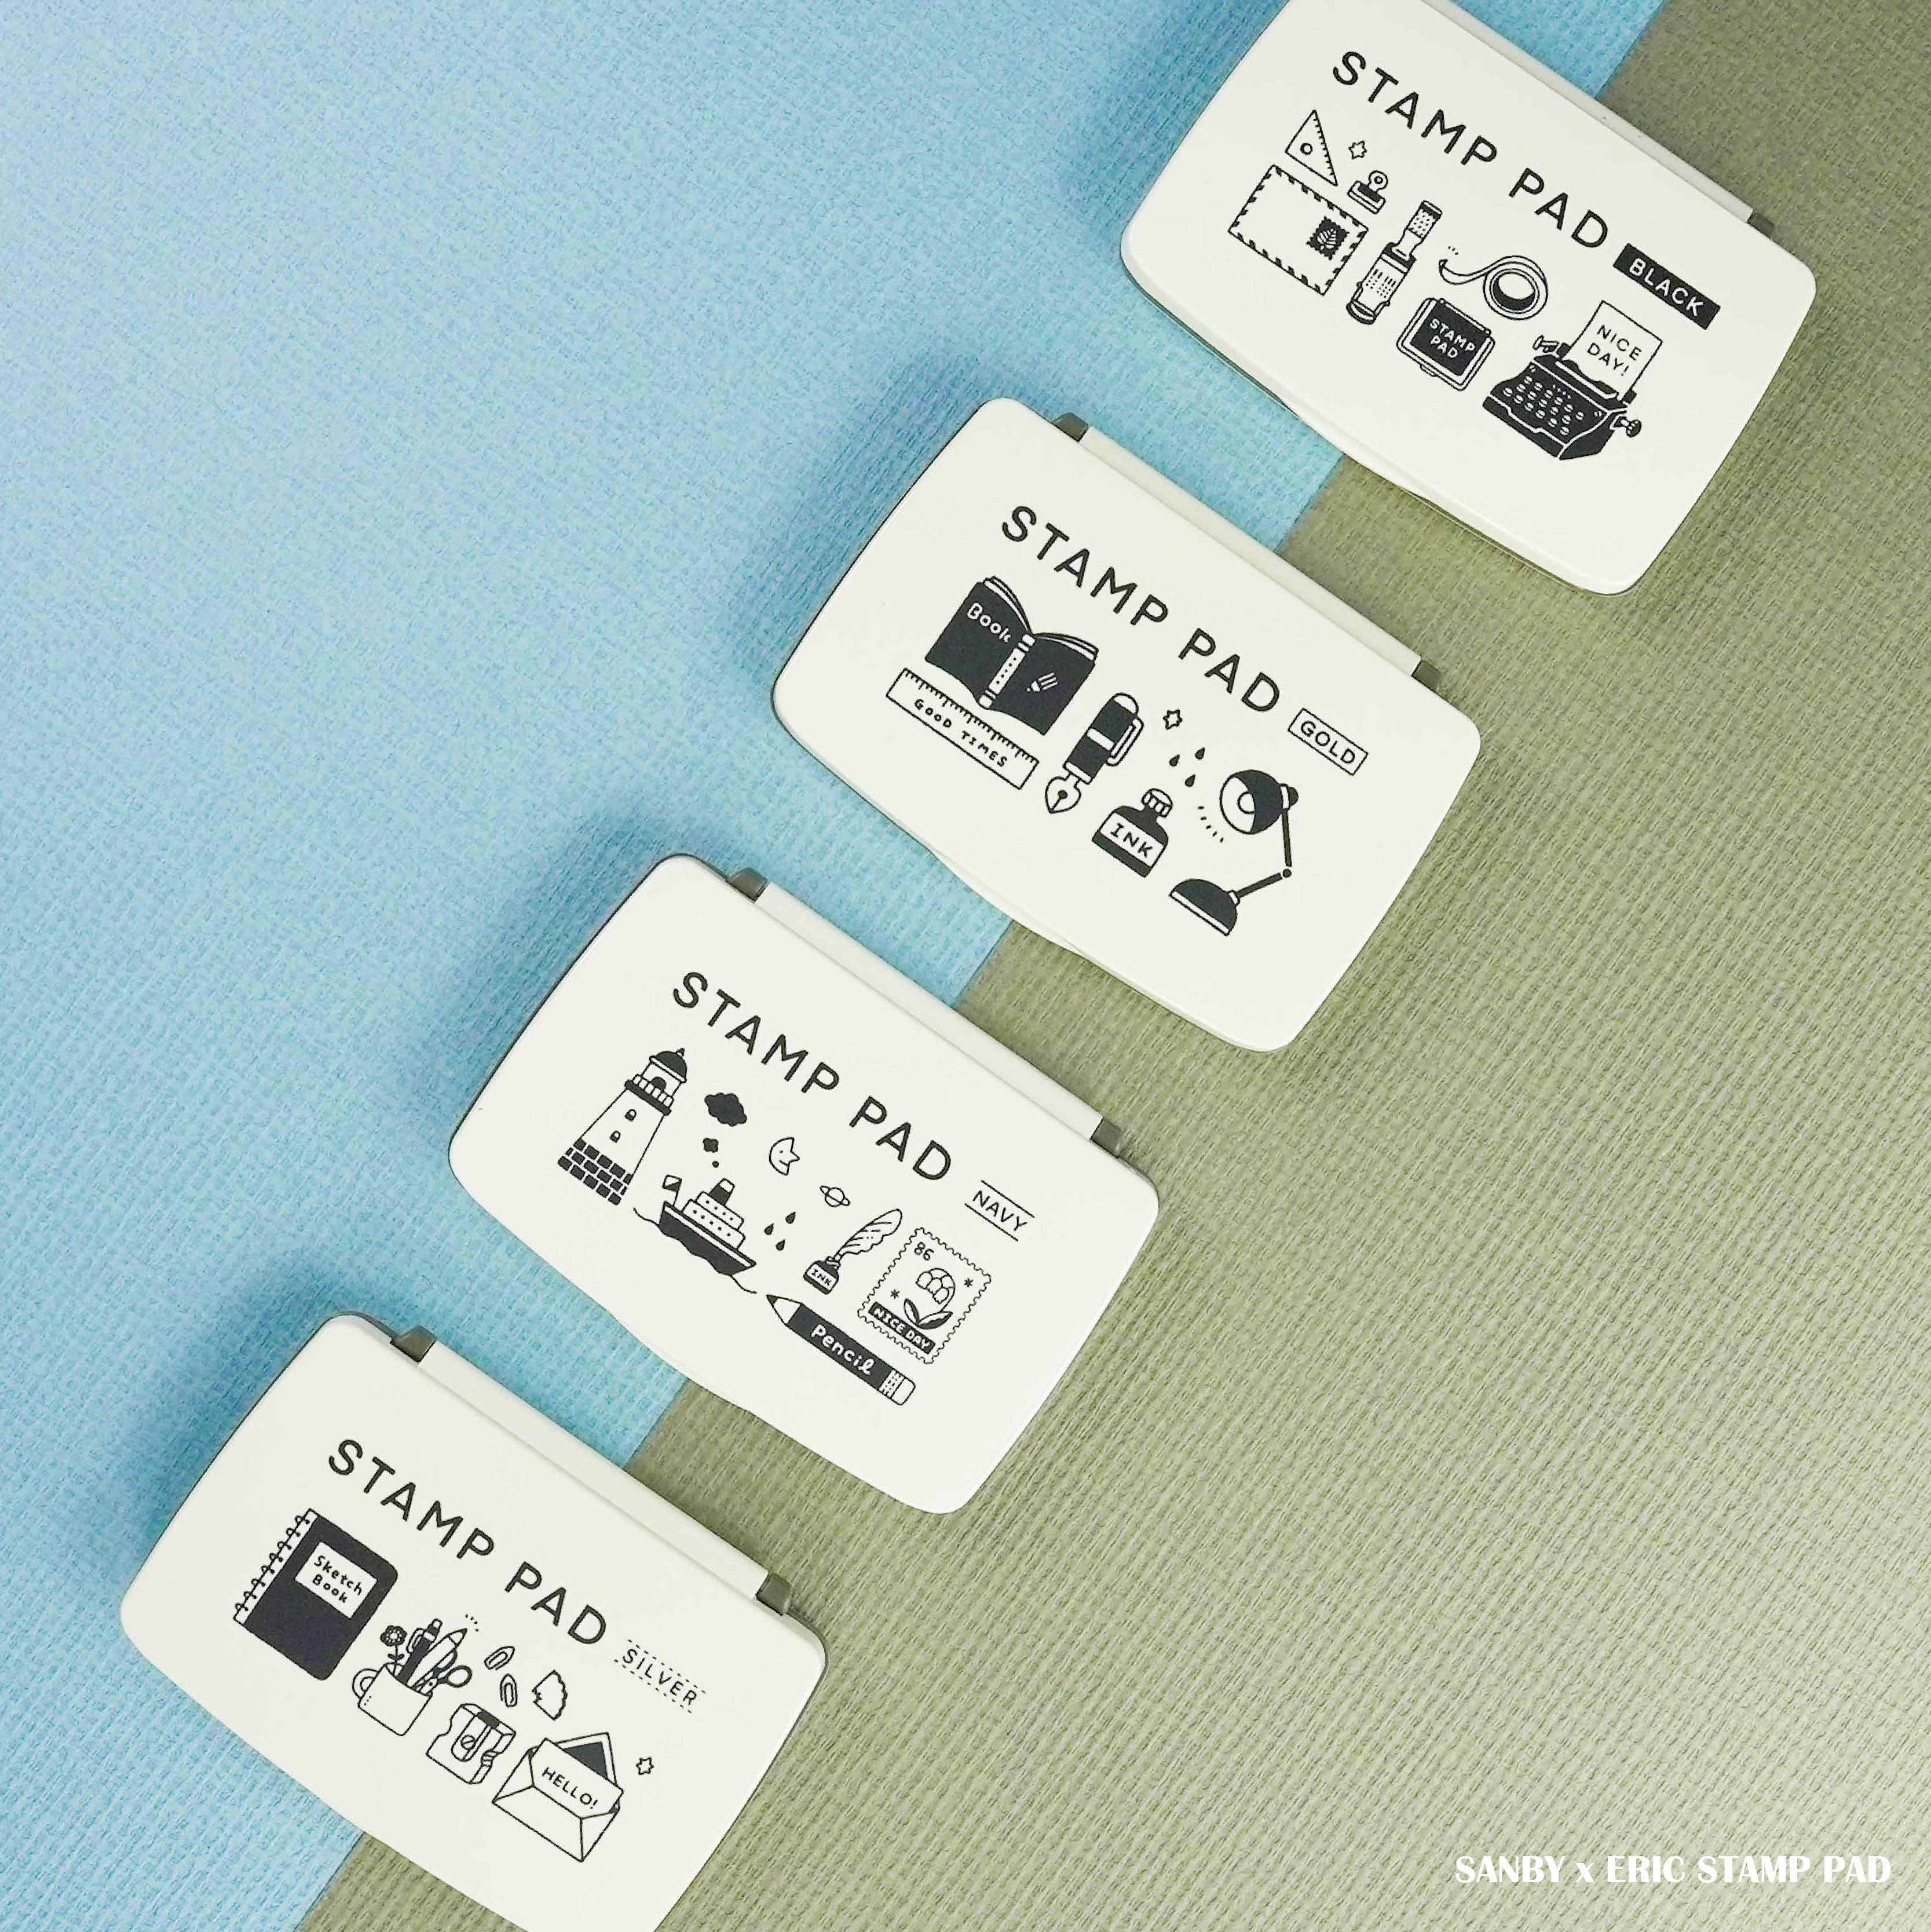 New products and good things to share 🎉 SANBY x Eric Jointly Launch STAMP PAD - CHL-STORE 